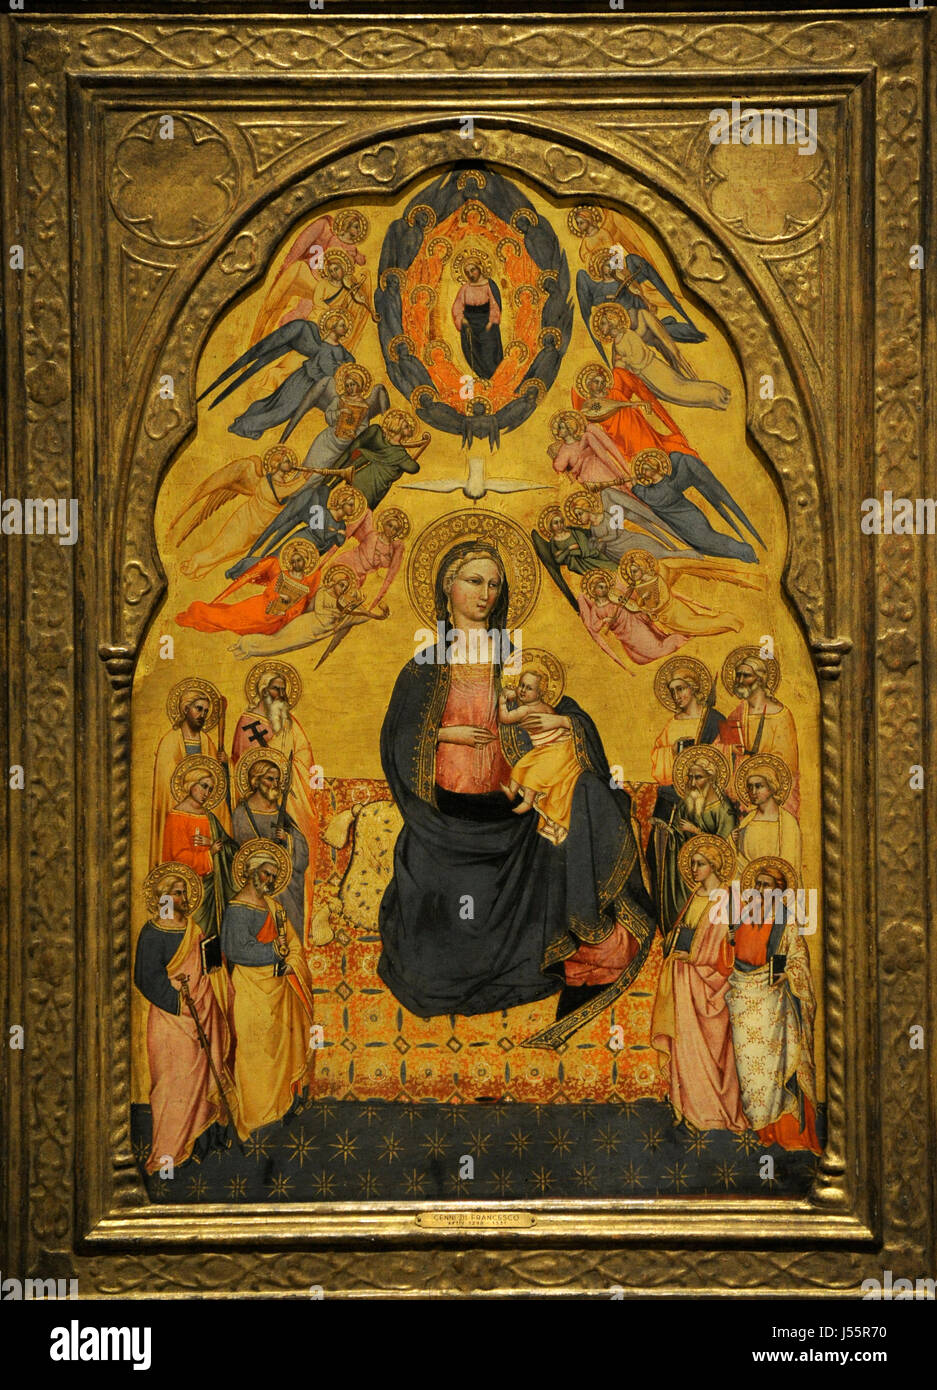 Cenni di Francesco di Ser Cenni (active in Florence 1369-ca.1415). Italian painter. Virgin of Humility with the Everlasting Father, Holy Spirit and the Twelve Apostles, 1375-1380. National Art Museum of Catalonia. Barcelona. Catalonia. Spain. Stock Photo